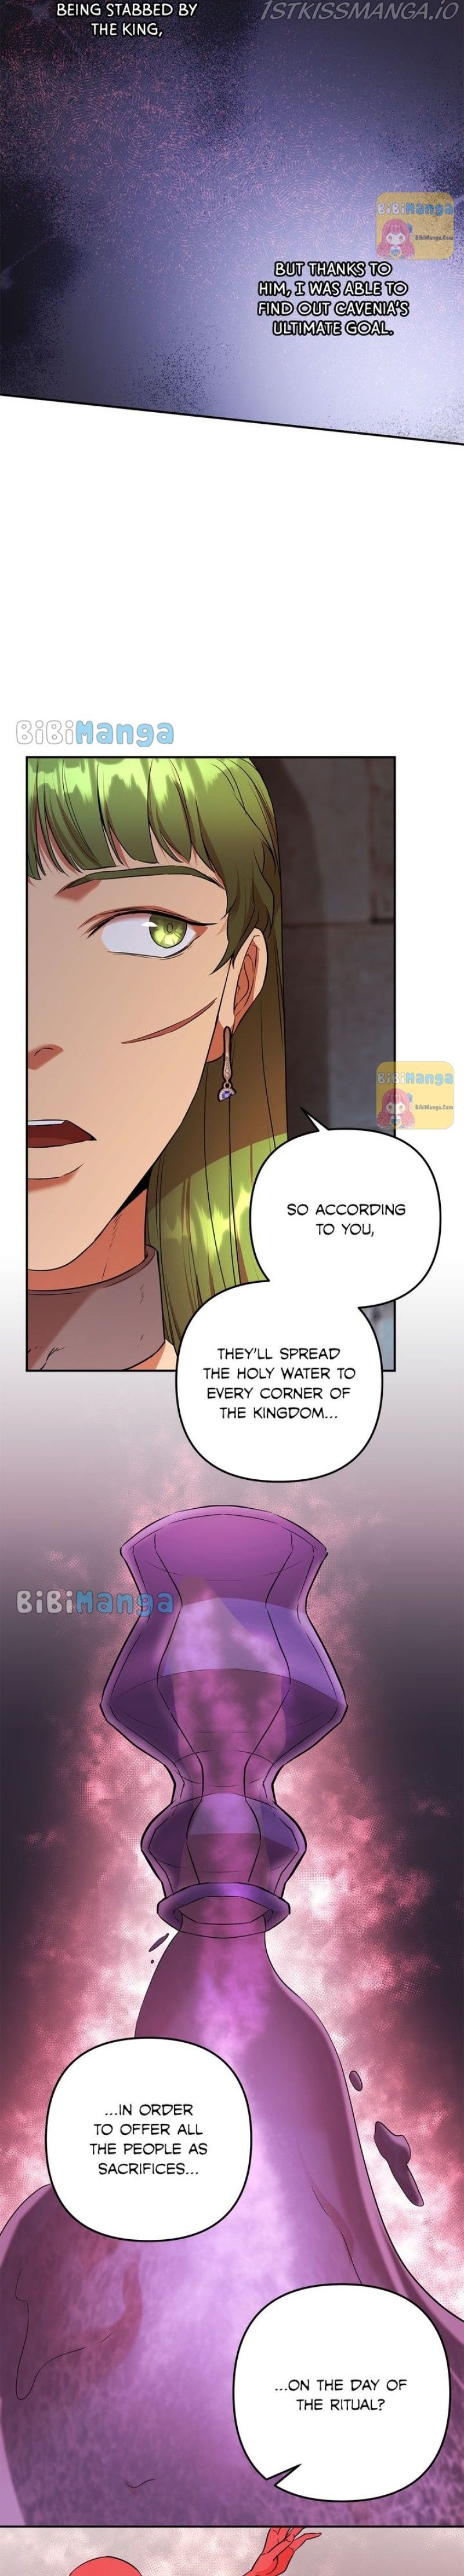 Agatha Chapter 48 page 14 - MangaWeebs.in